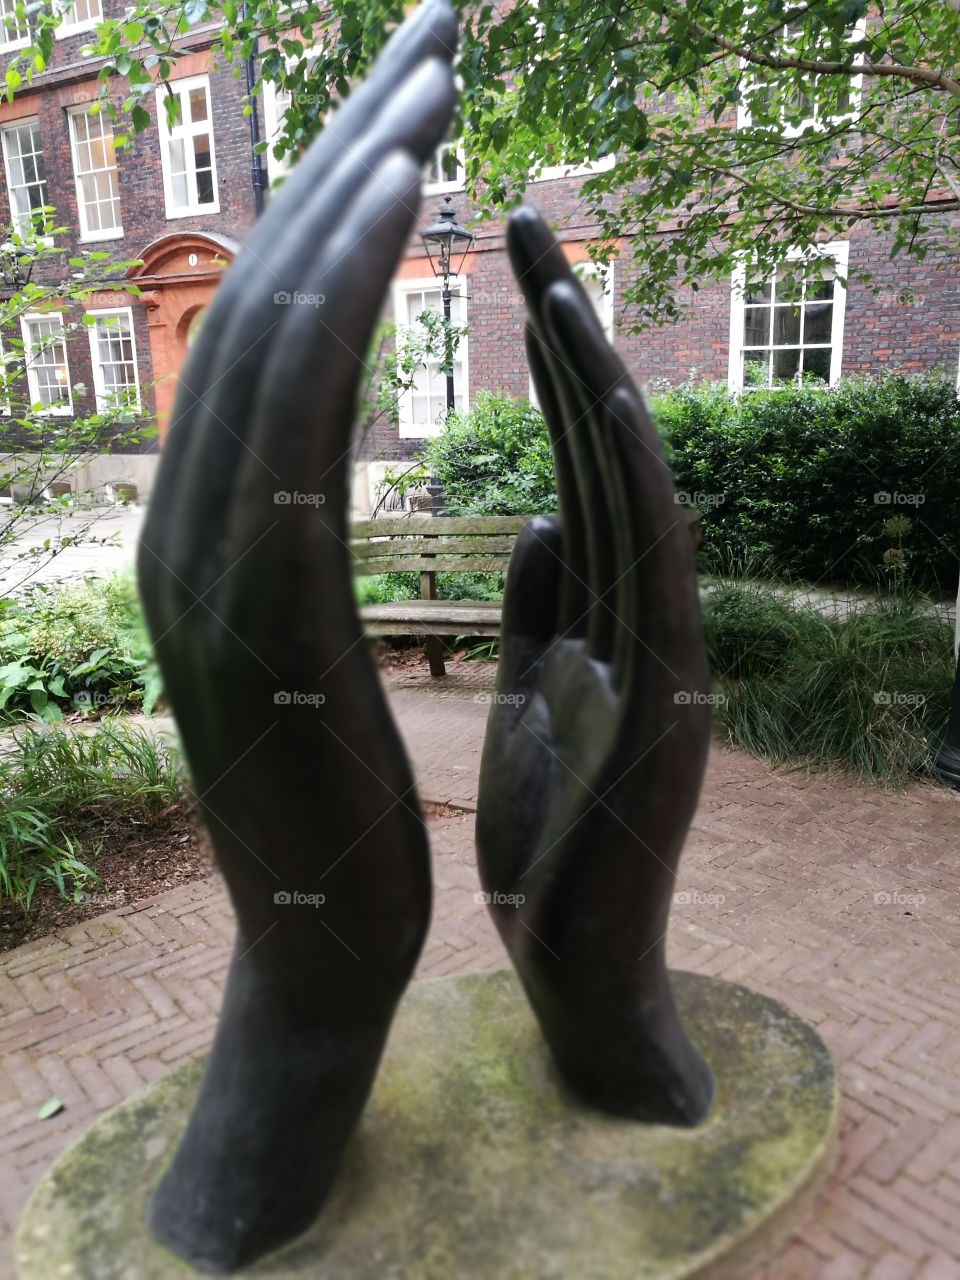 monument of hands